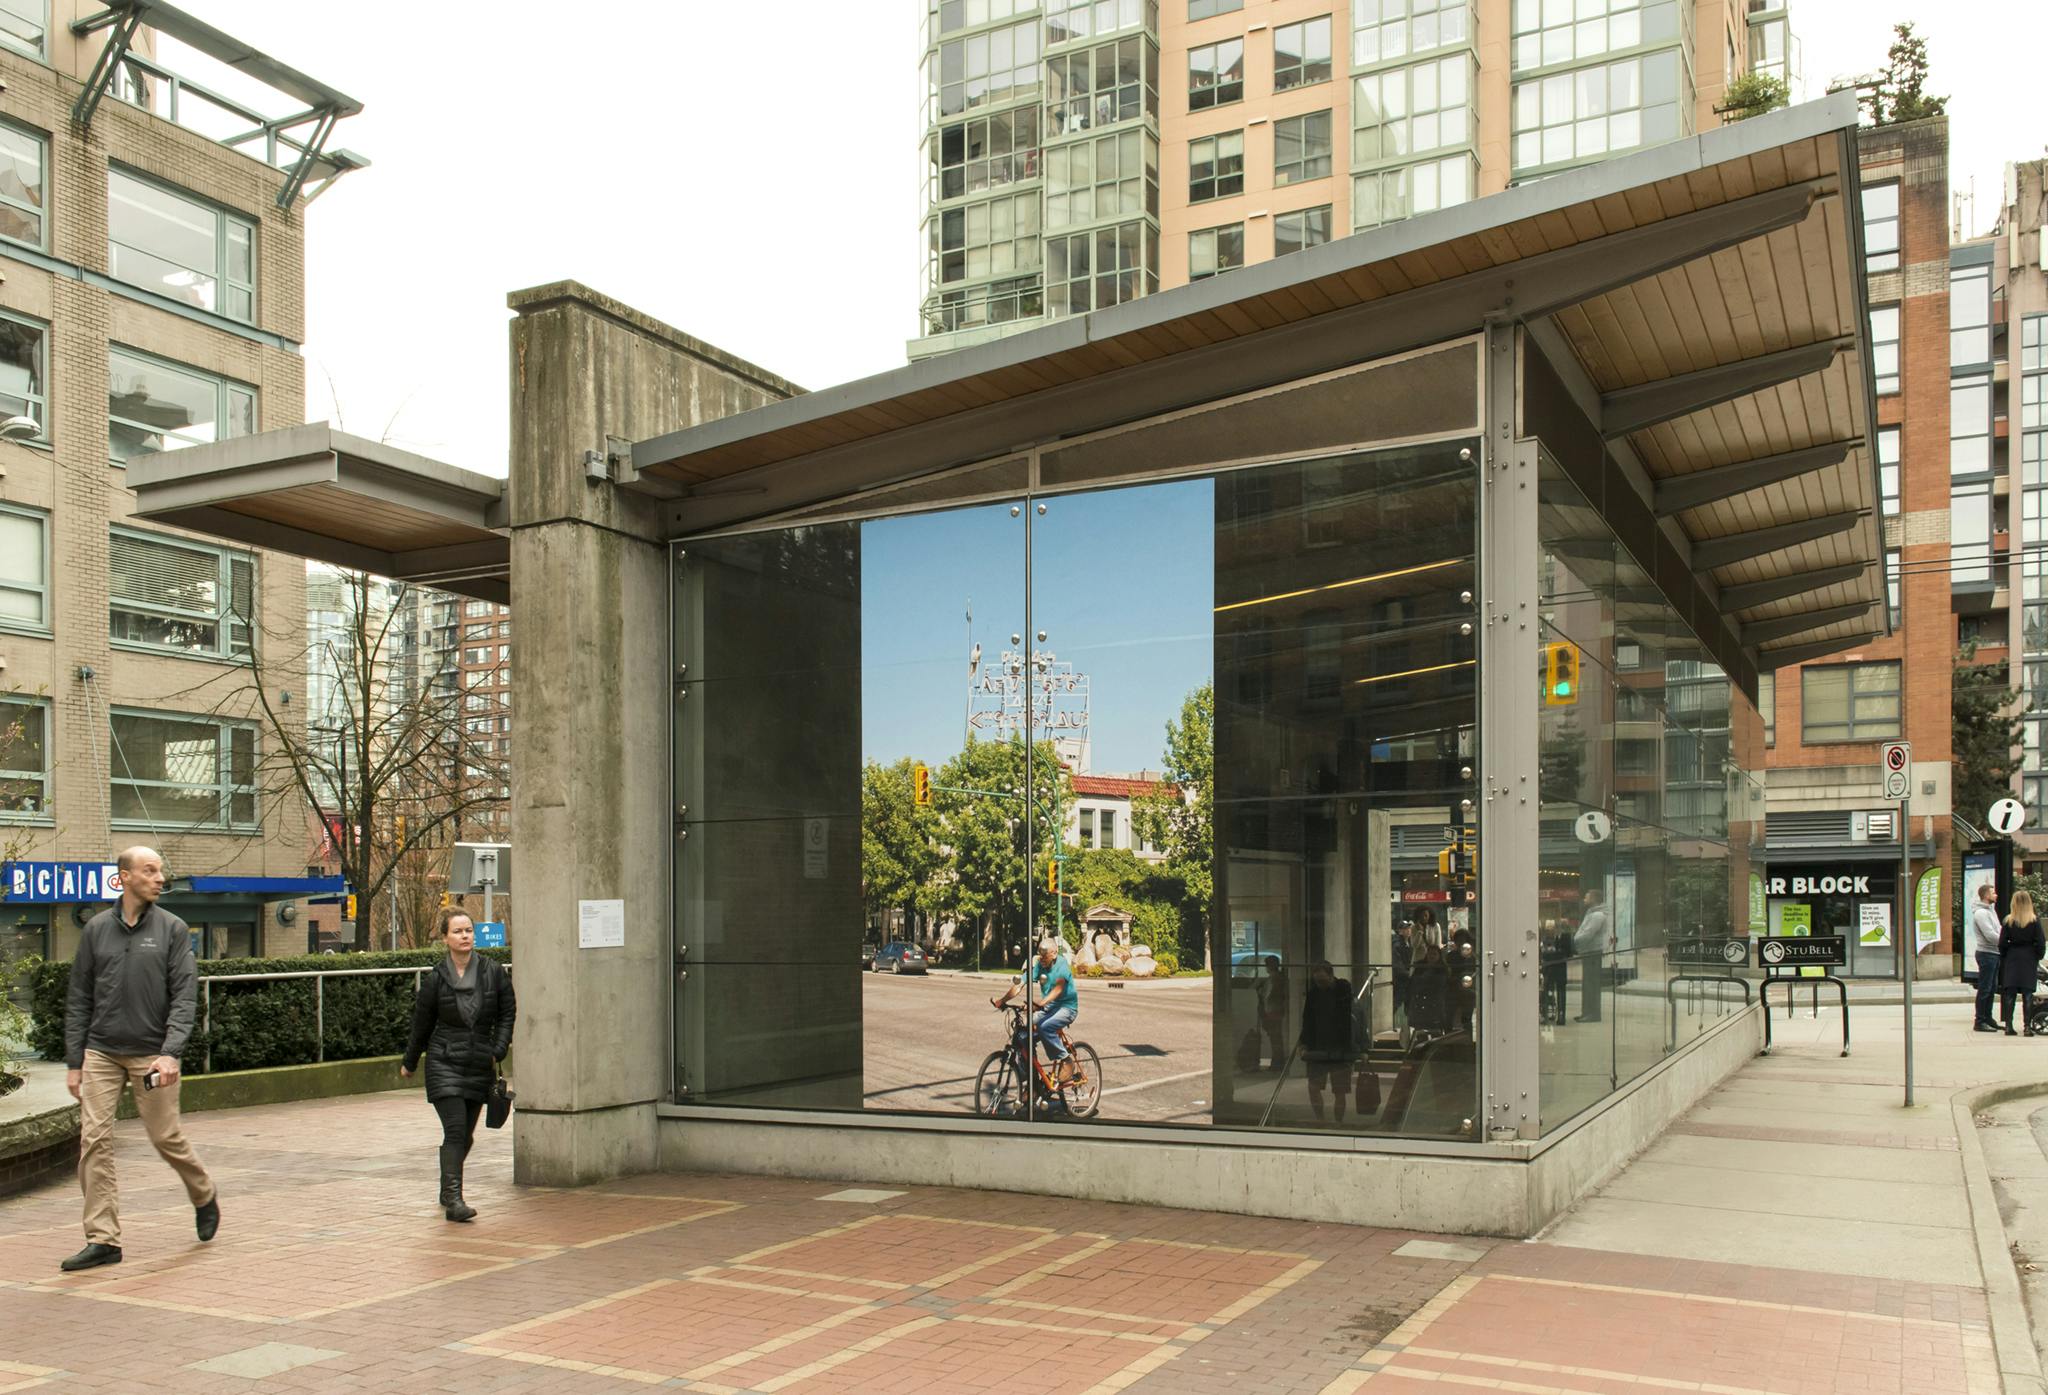 Exterior of the Yaletown Roundhouse Station with a large, vinyl photograph installed on the facade. In the photograph, a person bicycles past a building with a large sign in Cree syllabics on top.